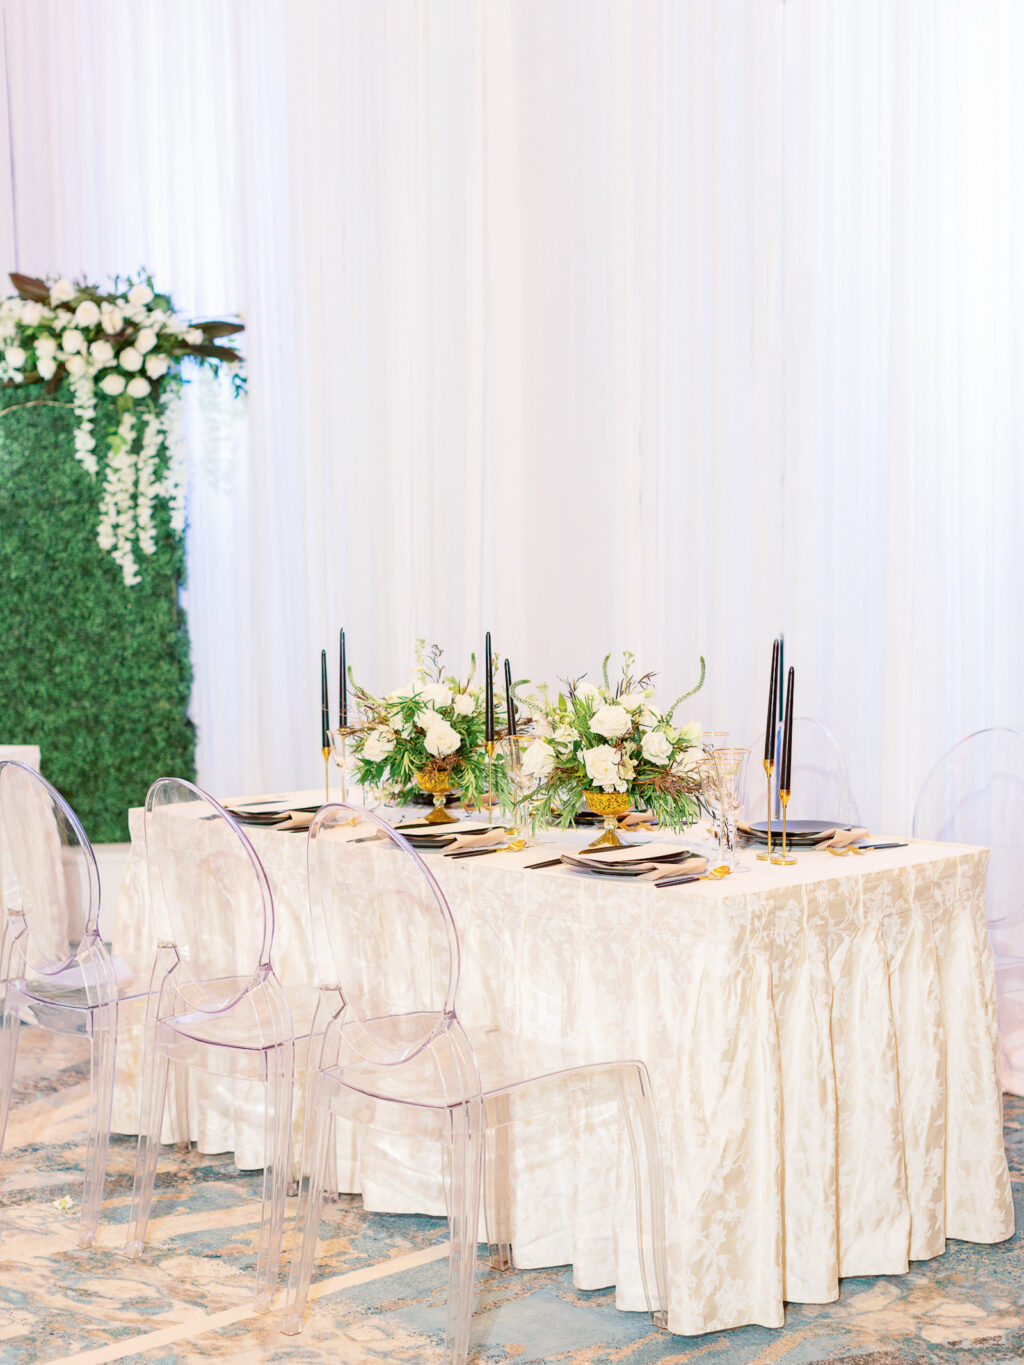 Elegant Wedding Reception Tablescape with White Linen and Ghost Chairs and Greenery Backdrop | Tampa Wedding Rental Company A Chair Affair